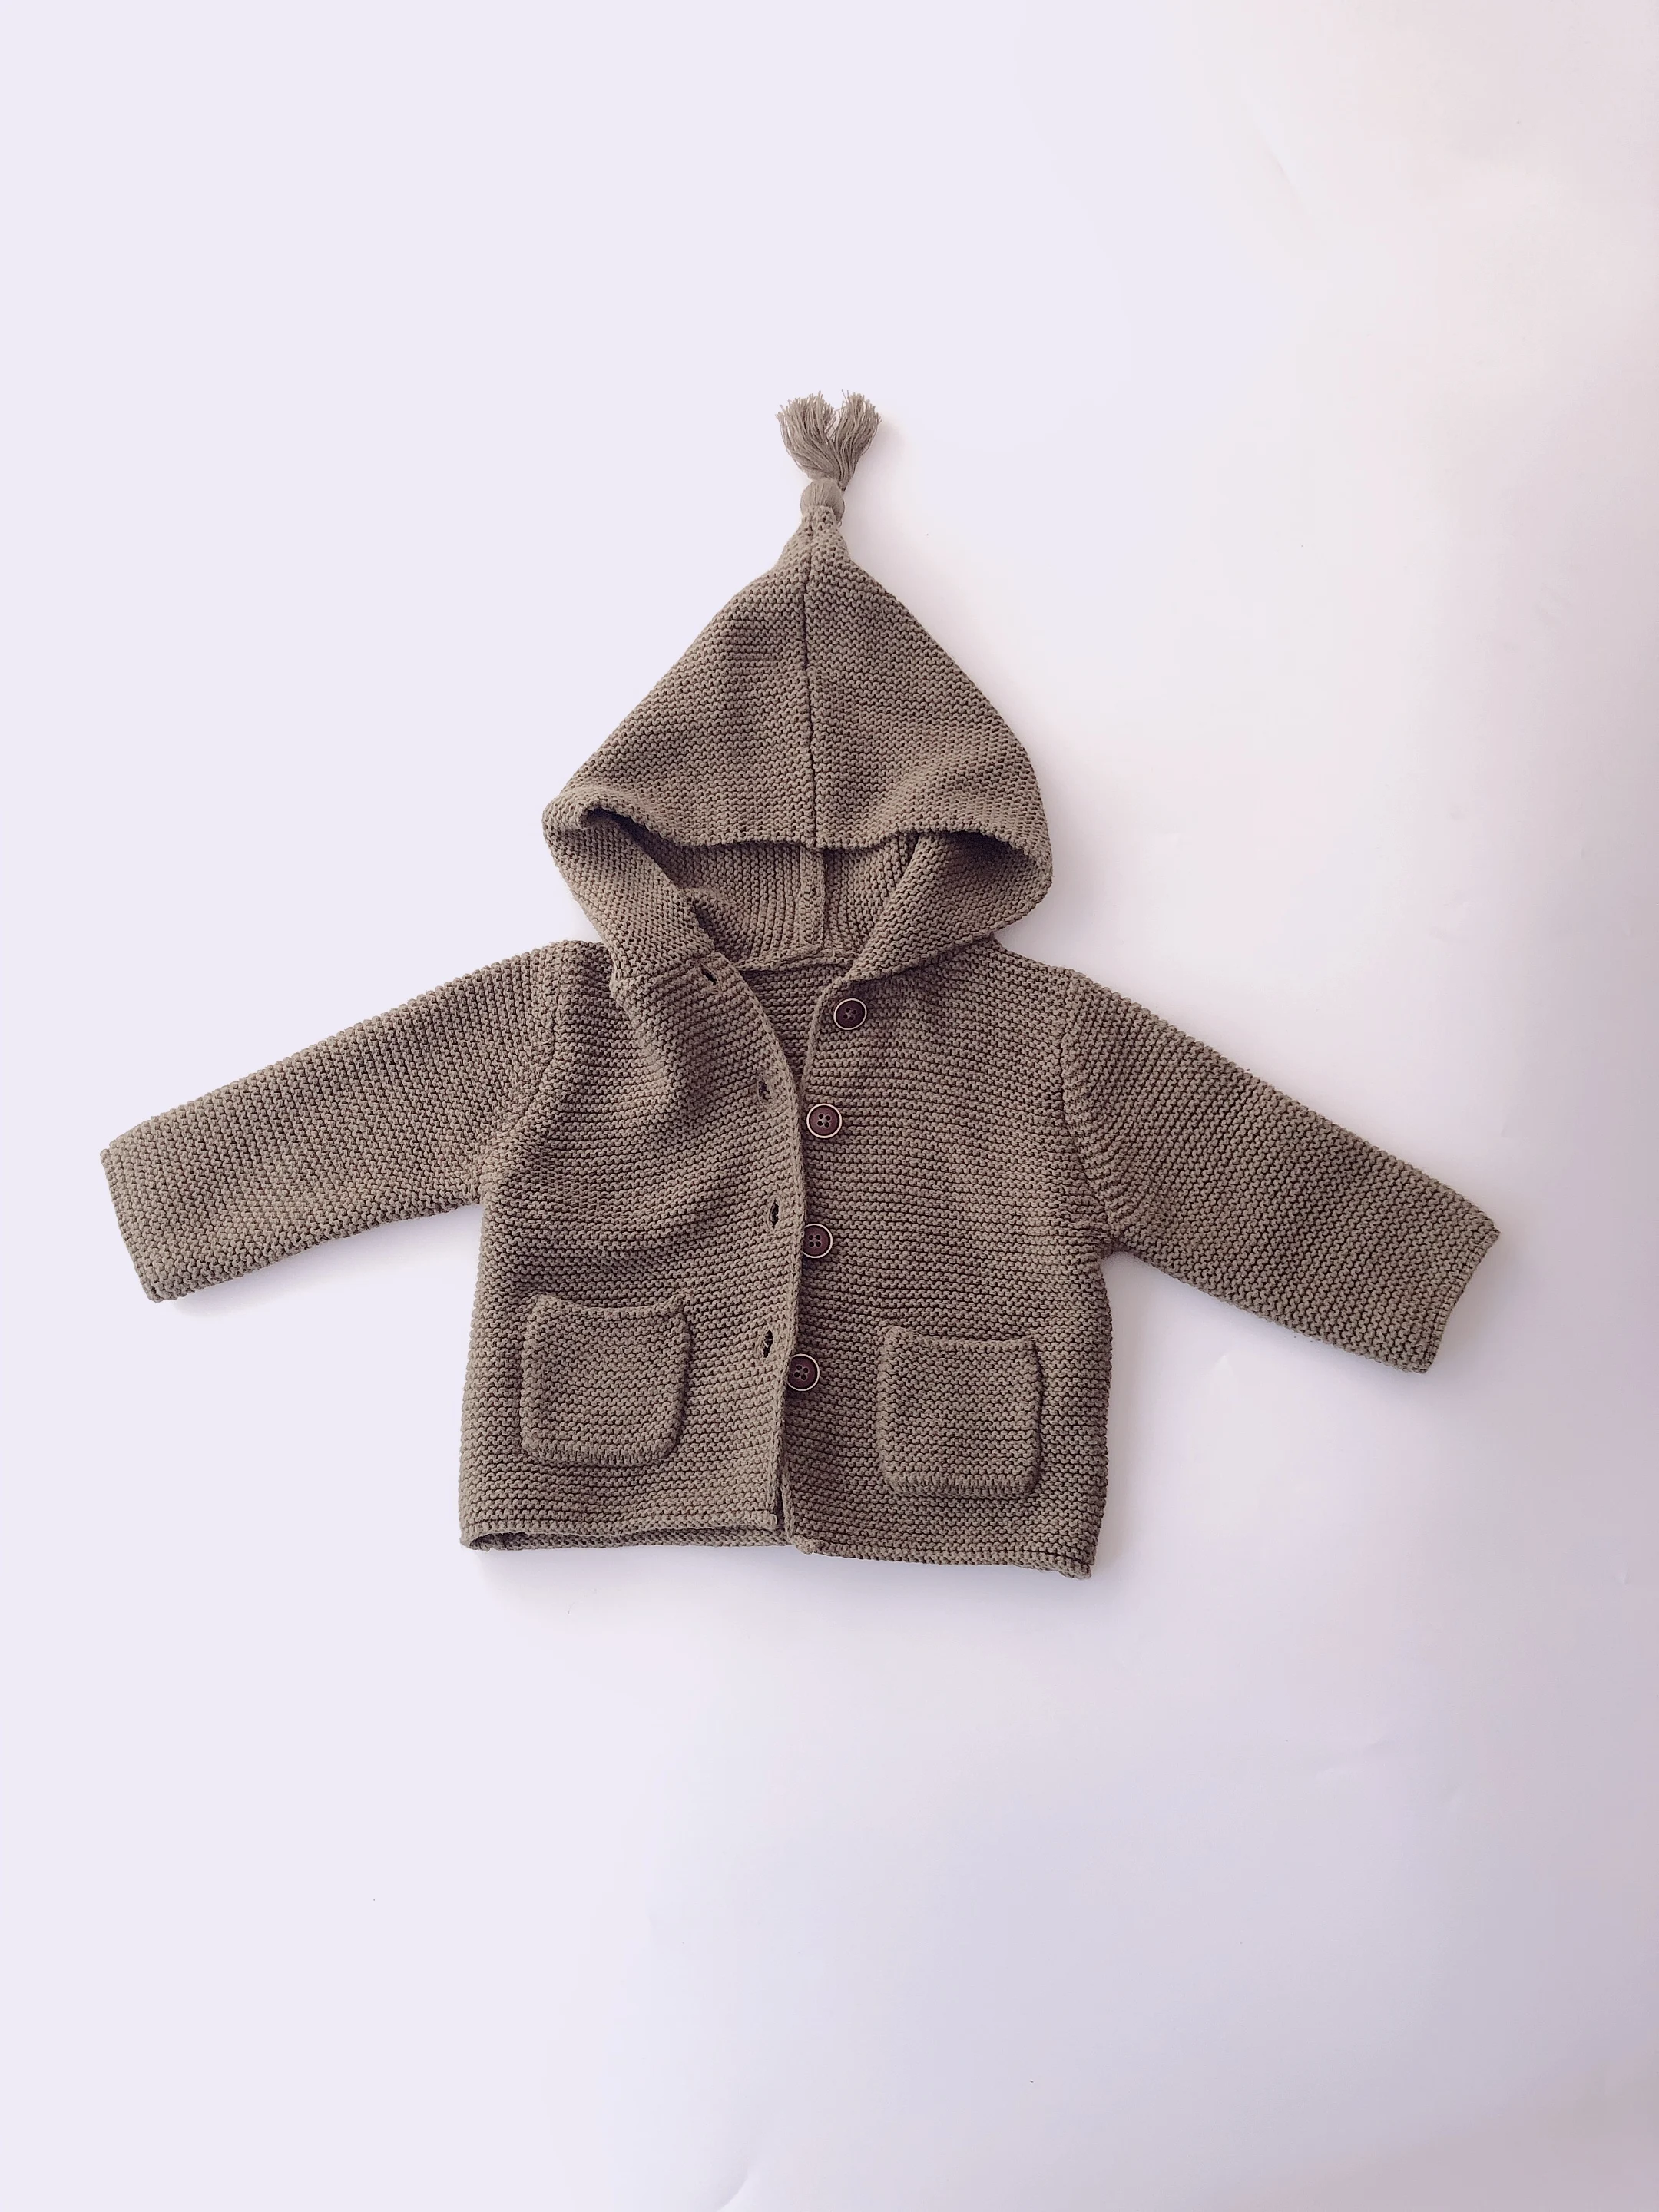 
2021 Fashion Baby Boy Baby Girl Hoodie Button Pocket Knitted Jacket Sweater Cardigan 